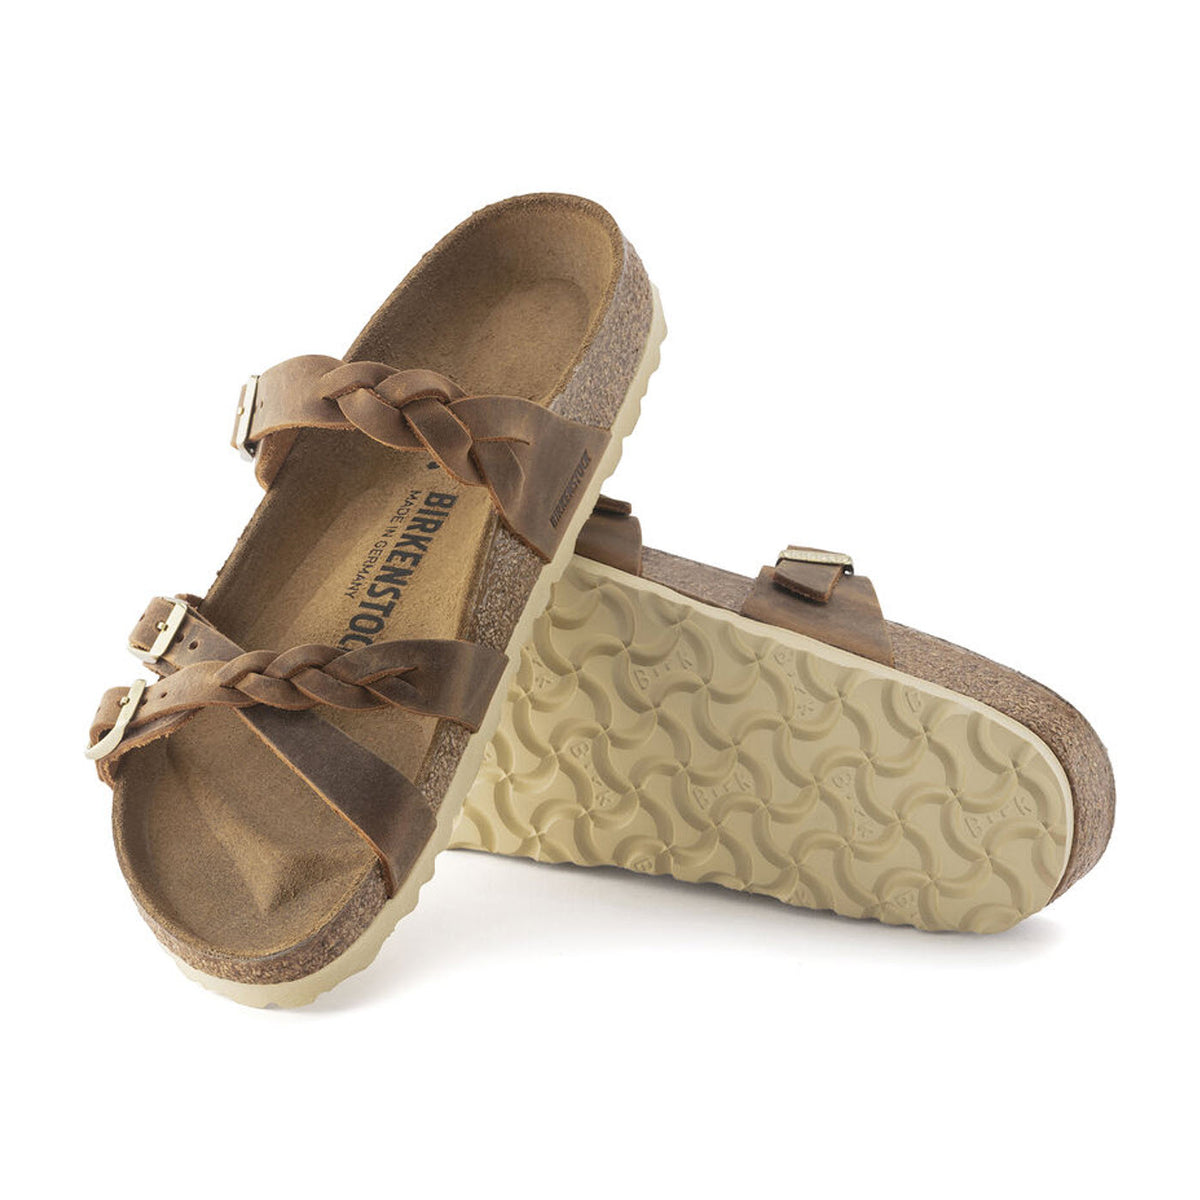 A pair of Birkenstock Franca Braid Cognac leather sandals with buckles, displayed against a white background, showing both the top and the treaded sole.